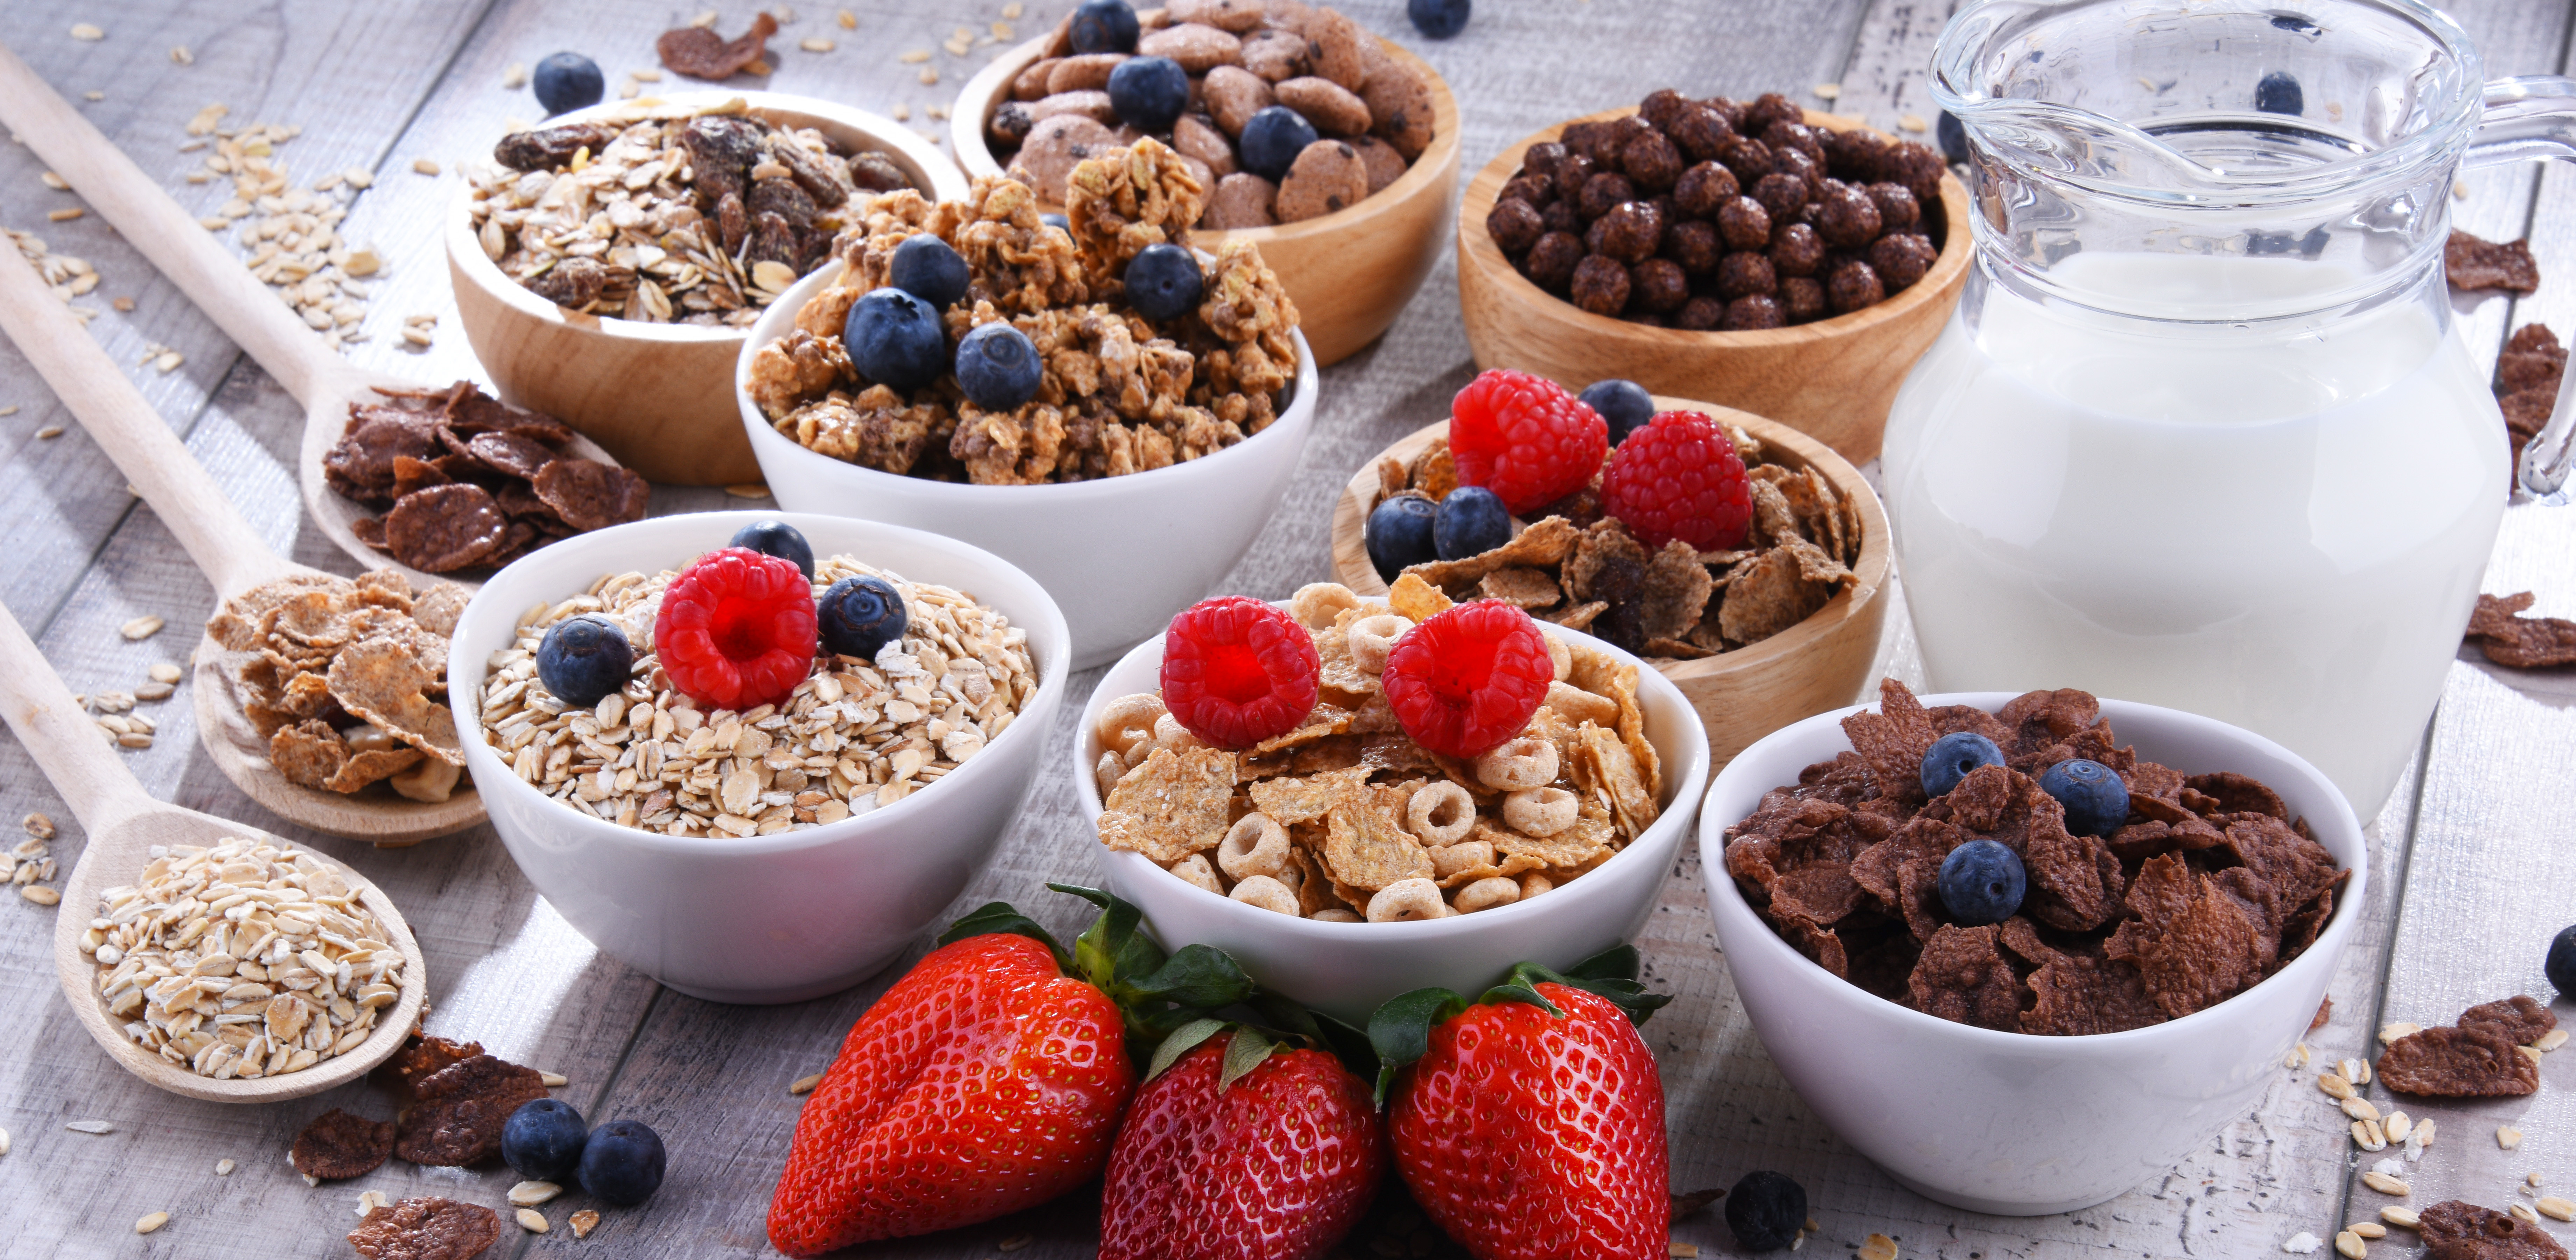 Bowls containing different sorts of breakfast cereal products.